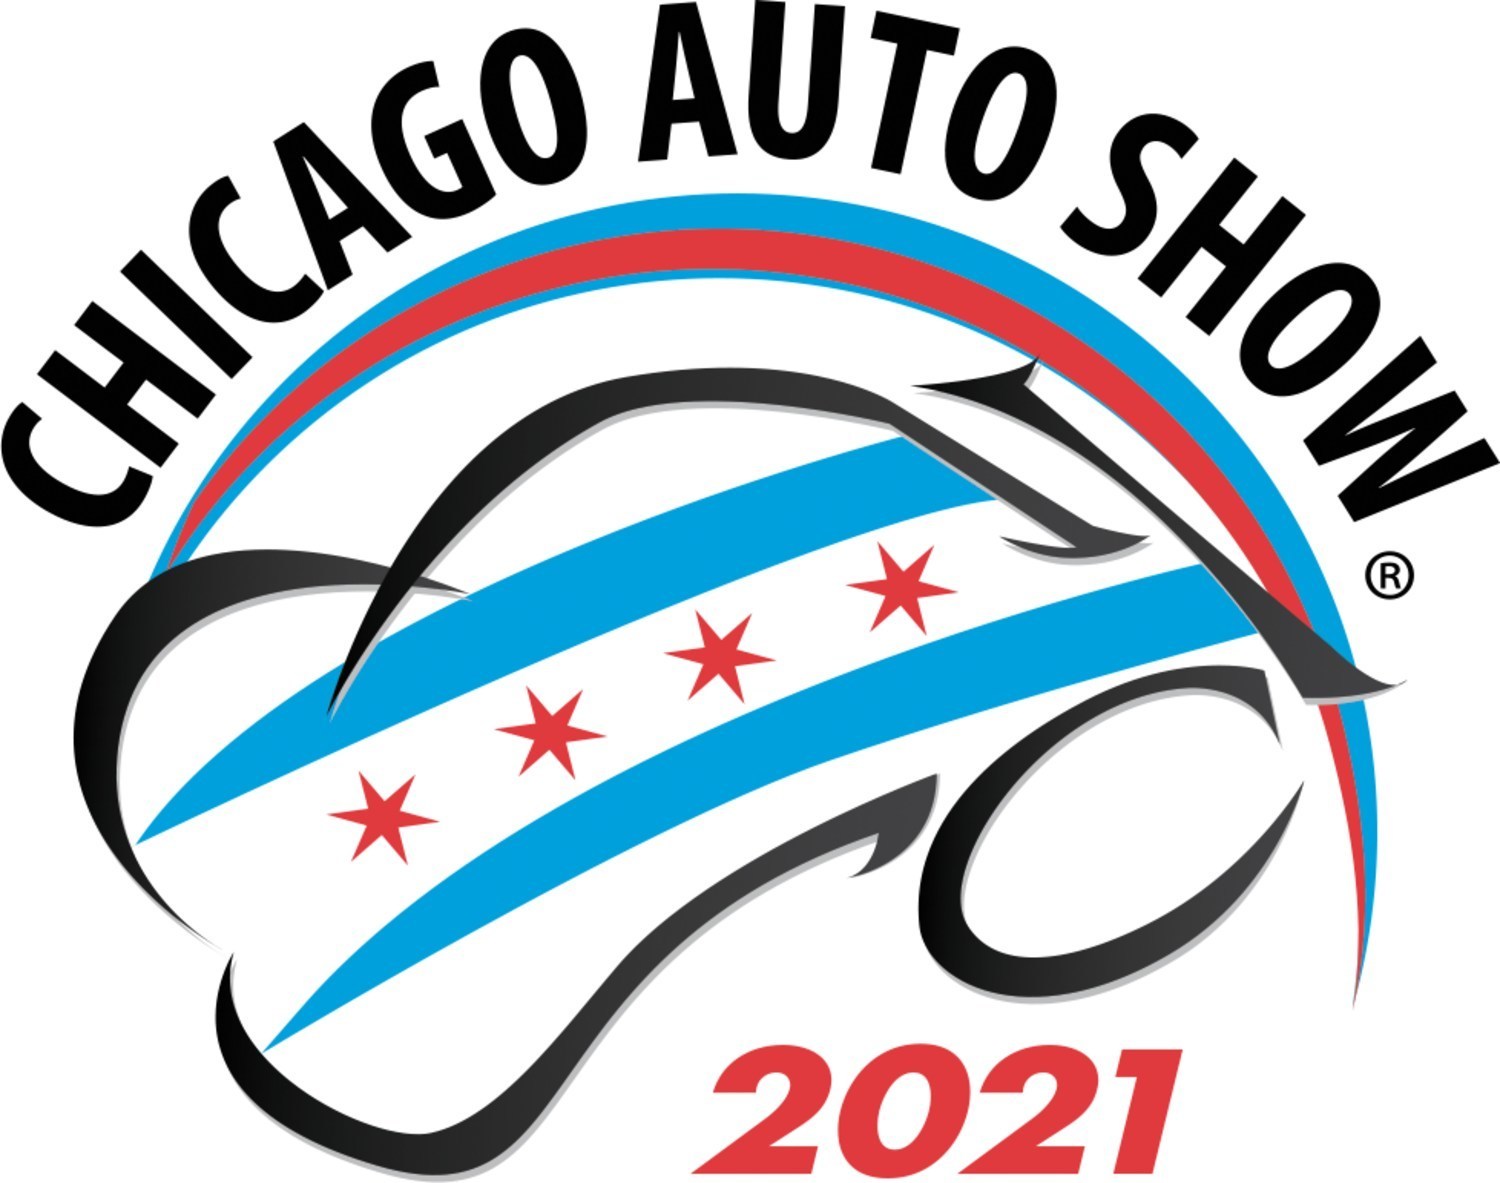 2021 Chicago Auto Show 2022 Jeep Compass The Daily Drive Consumer